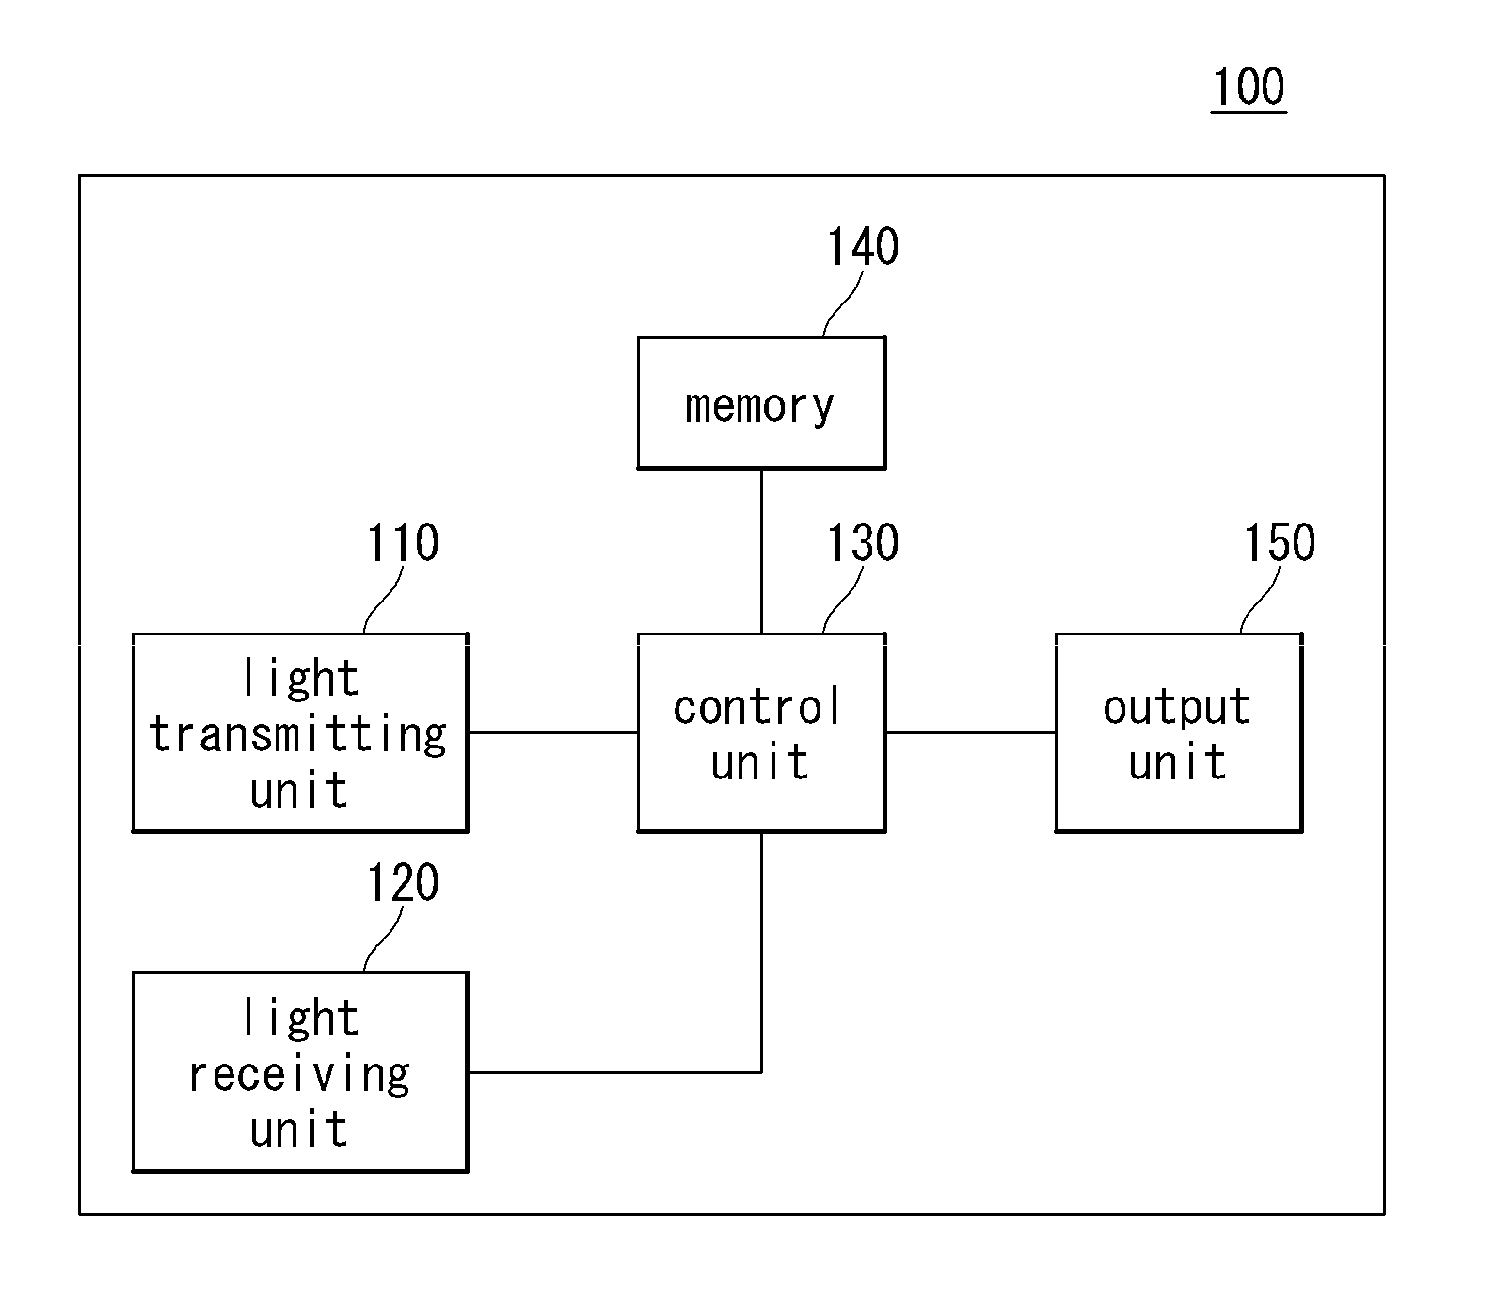 3 dimensional camera and method for controlling the same